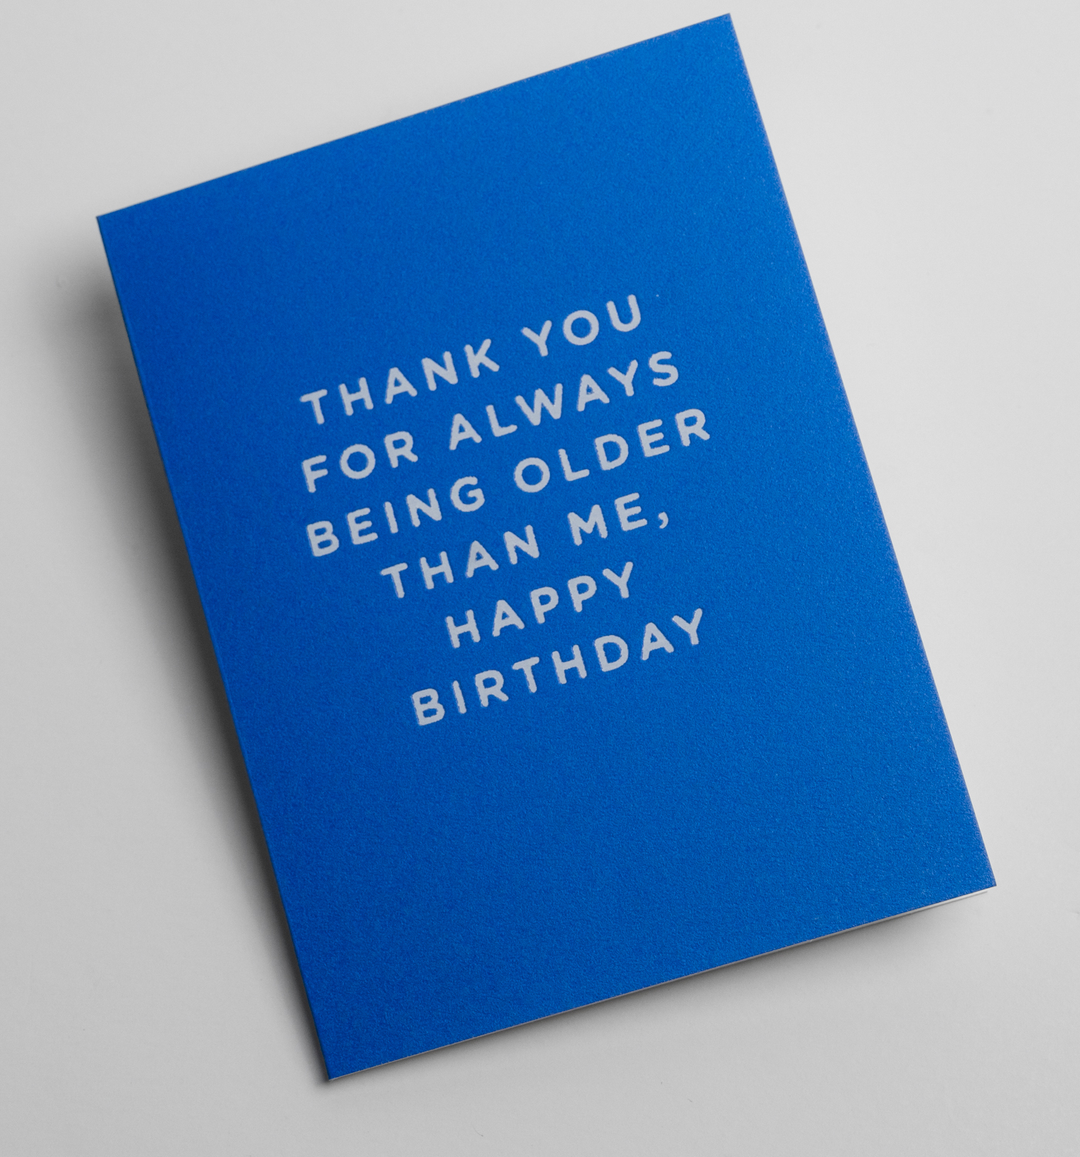 Thank you for Always Being Older - Mini Card